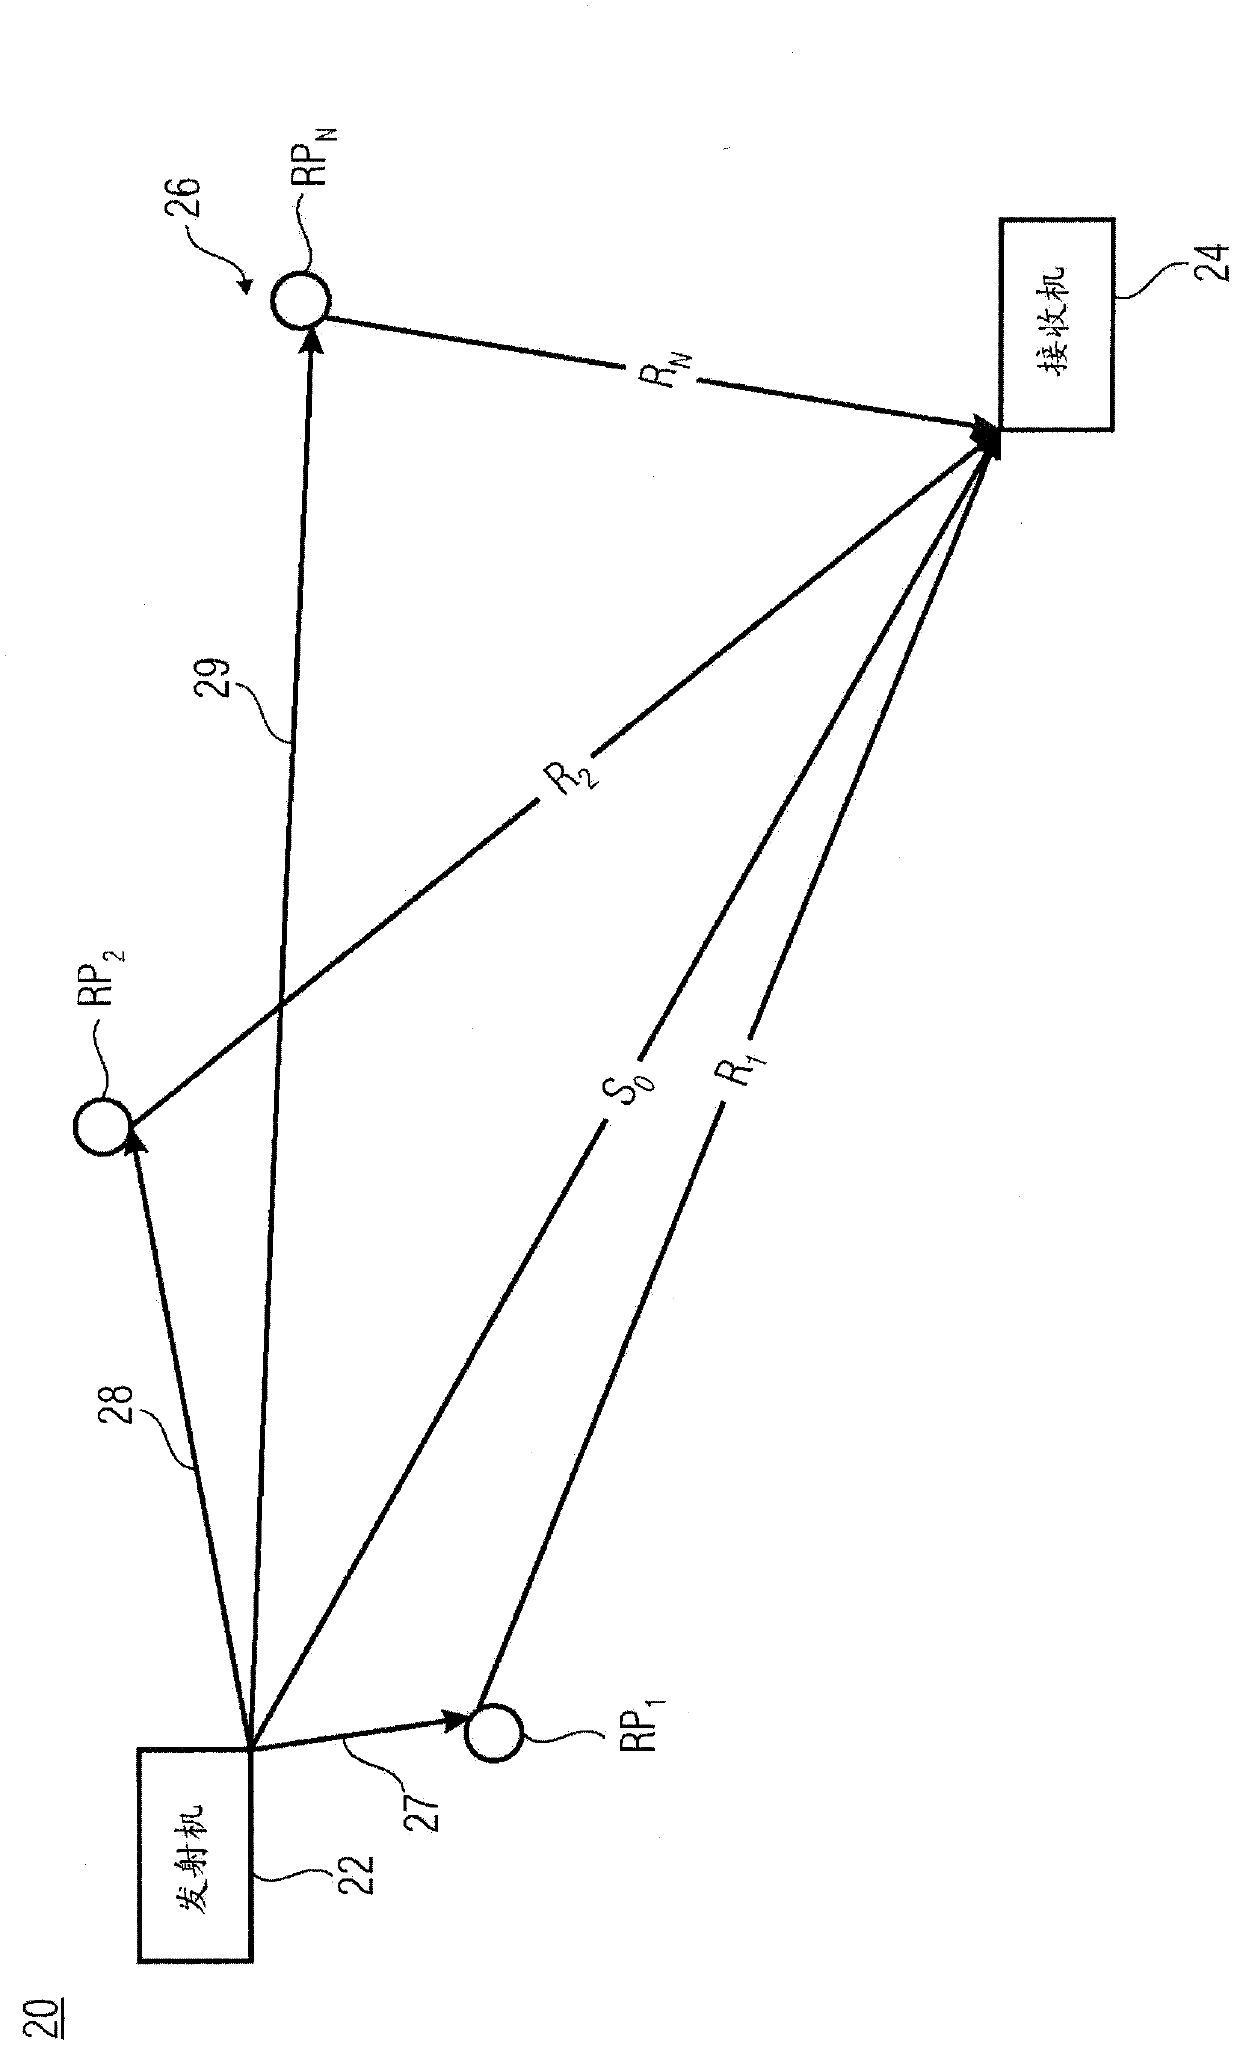 Method for generating a signal for measuring distance, and method and system for measuring distance between a sender and a receiver